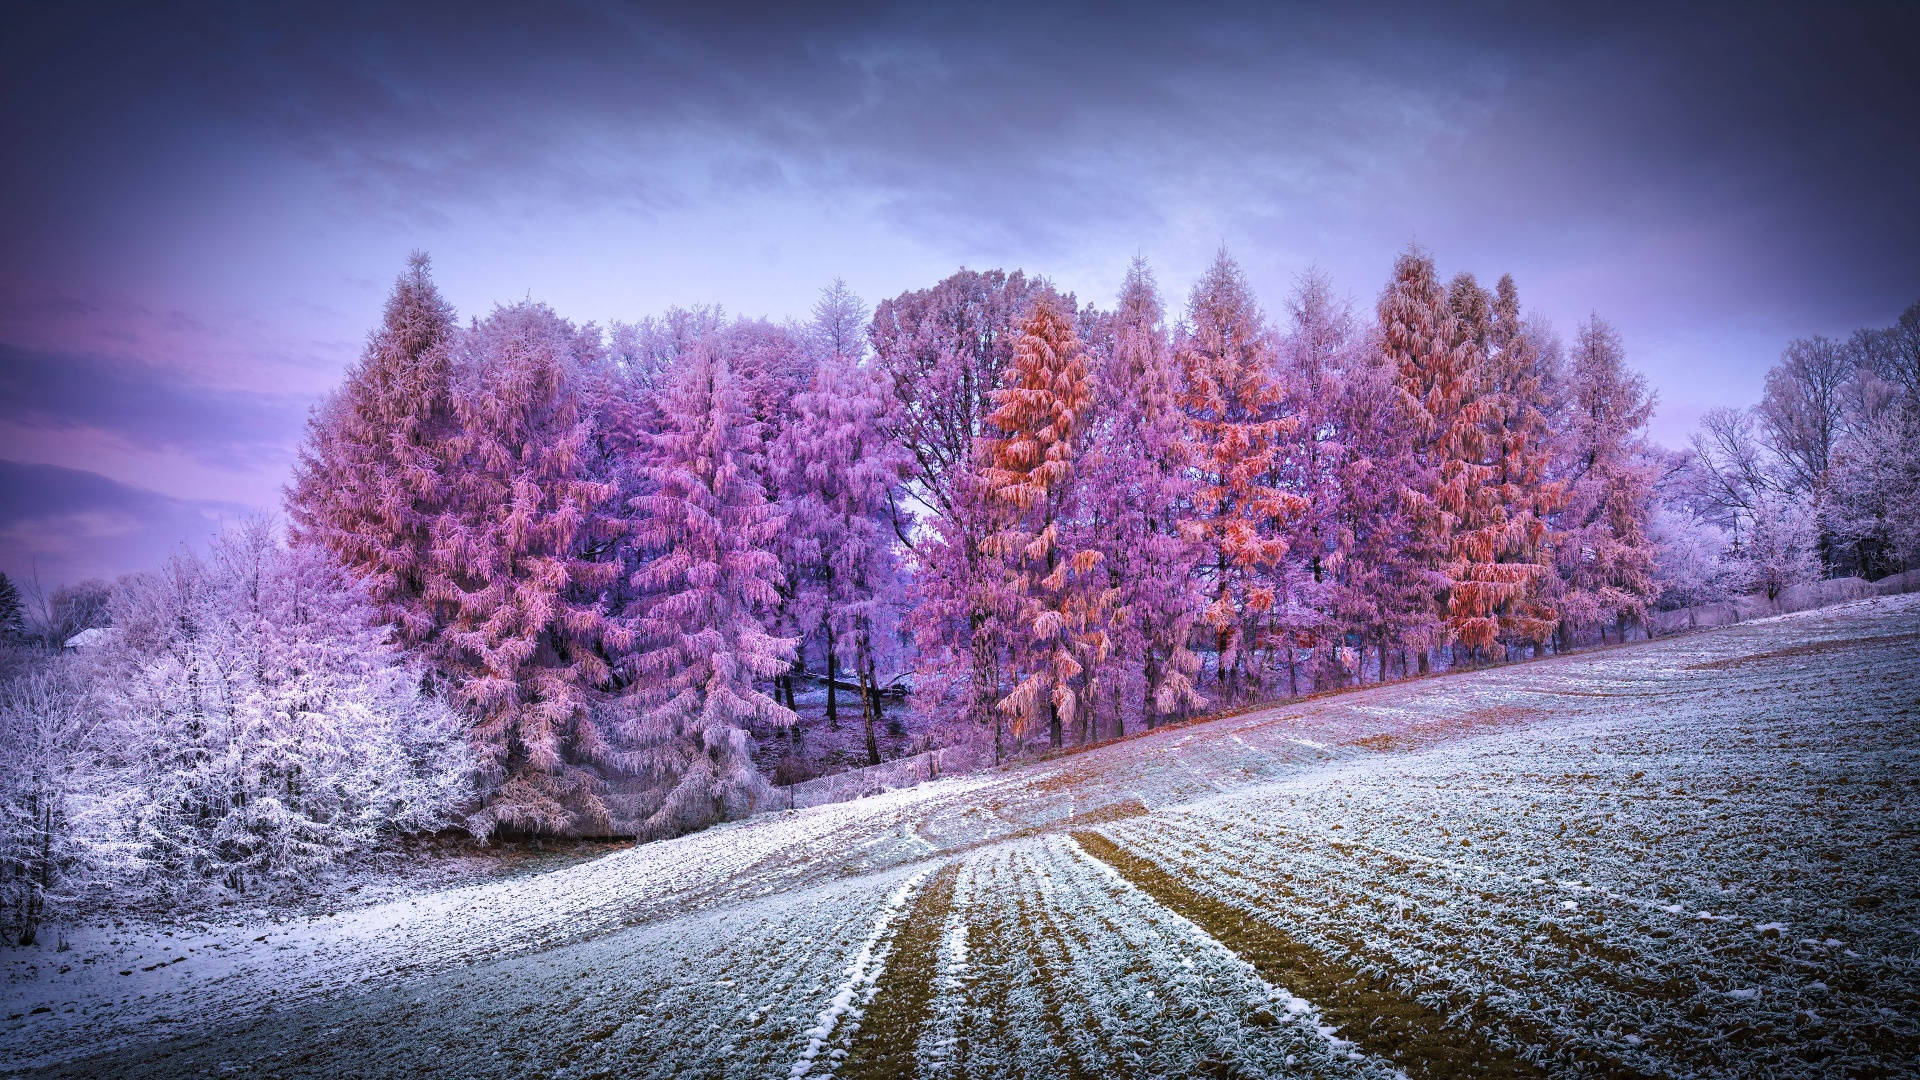 A snowy field with trees in the background. - Winter, snow